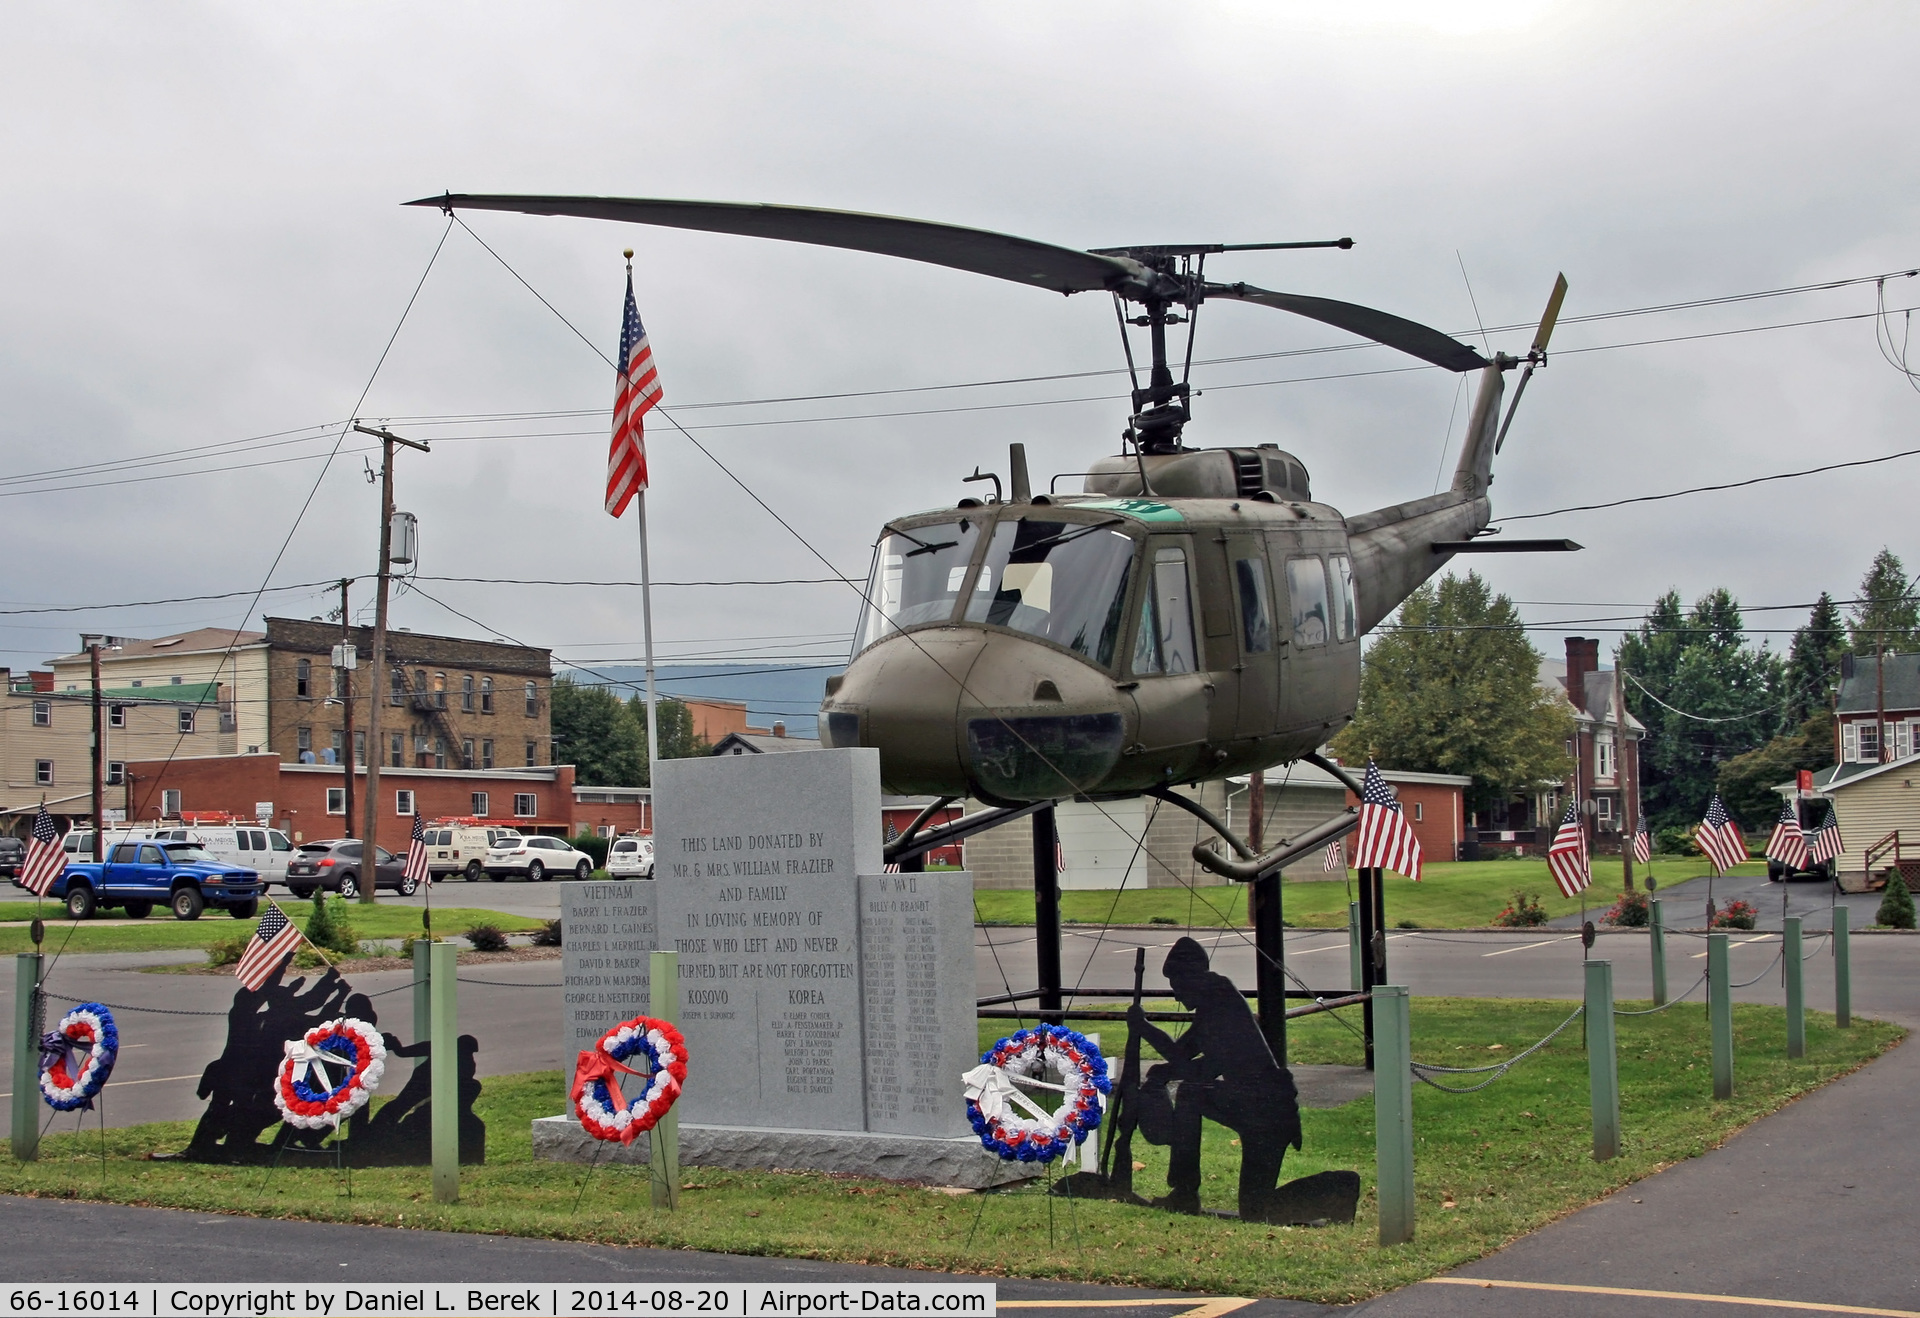 66-16014, 1966 Bell UH-1H Iriquois C/N 5708, This Huey is part of a veterans memorial, across the street from the American Legion Post in Jersey Shore, PA.